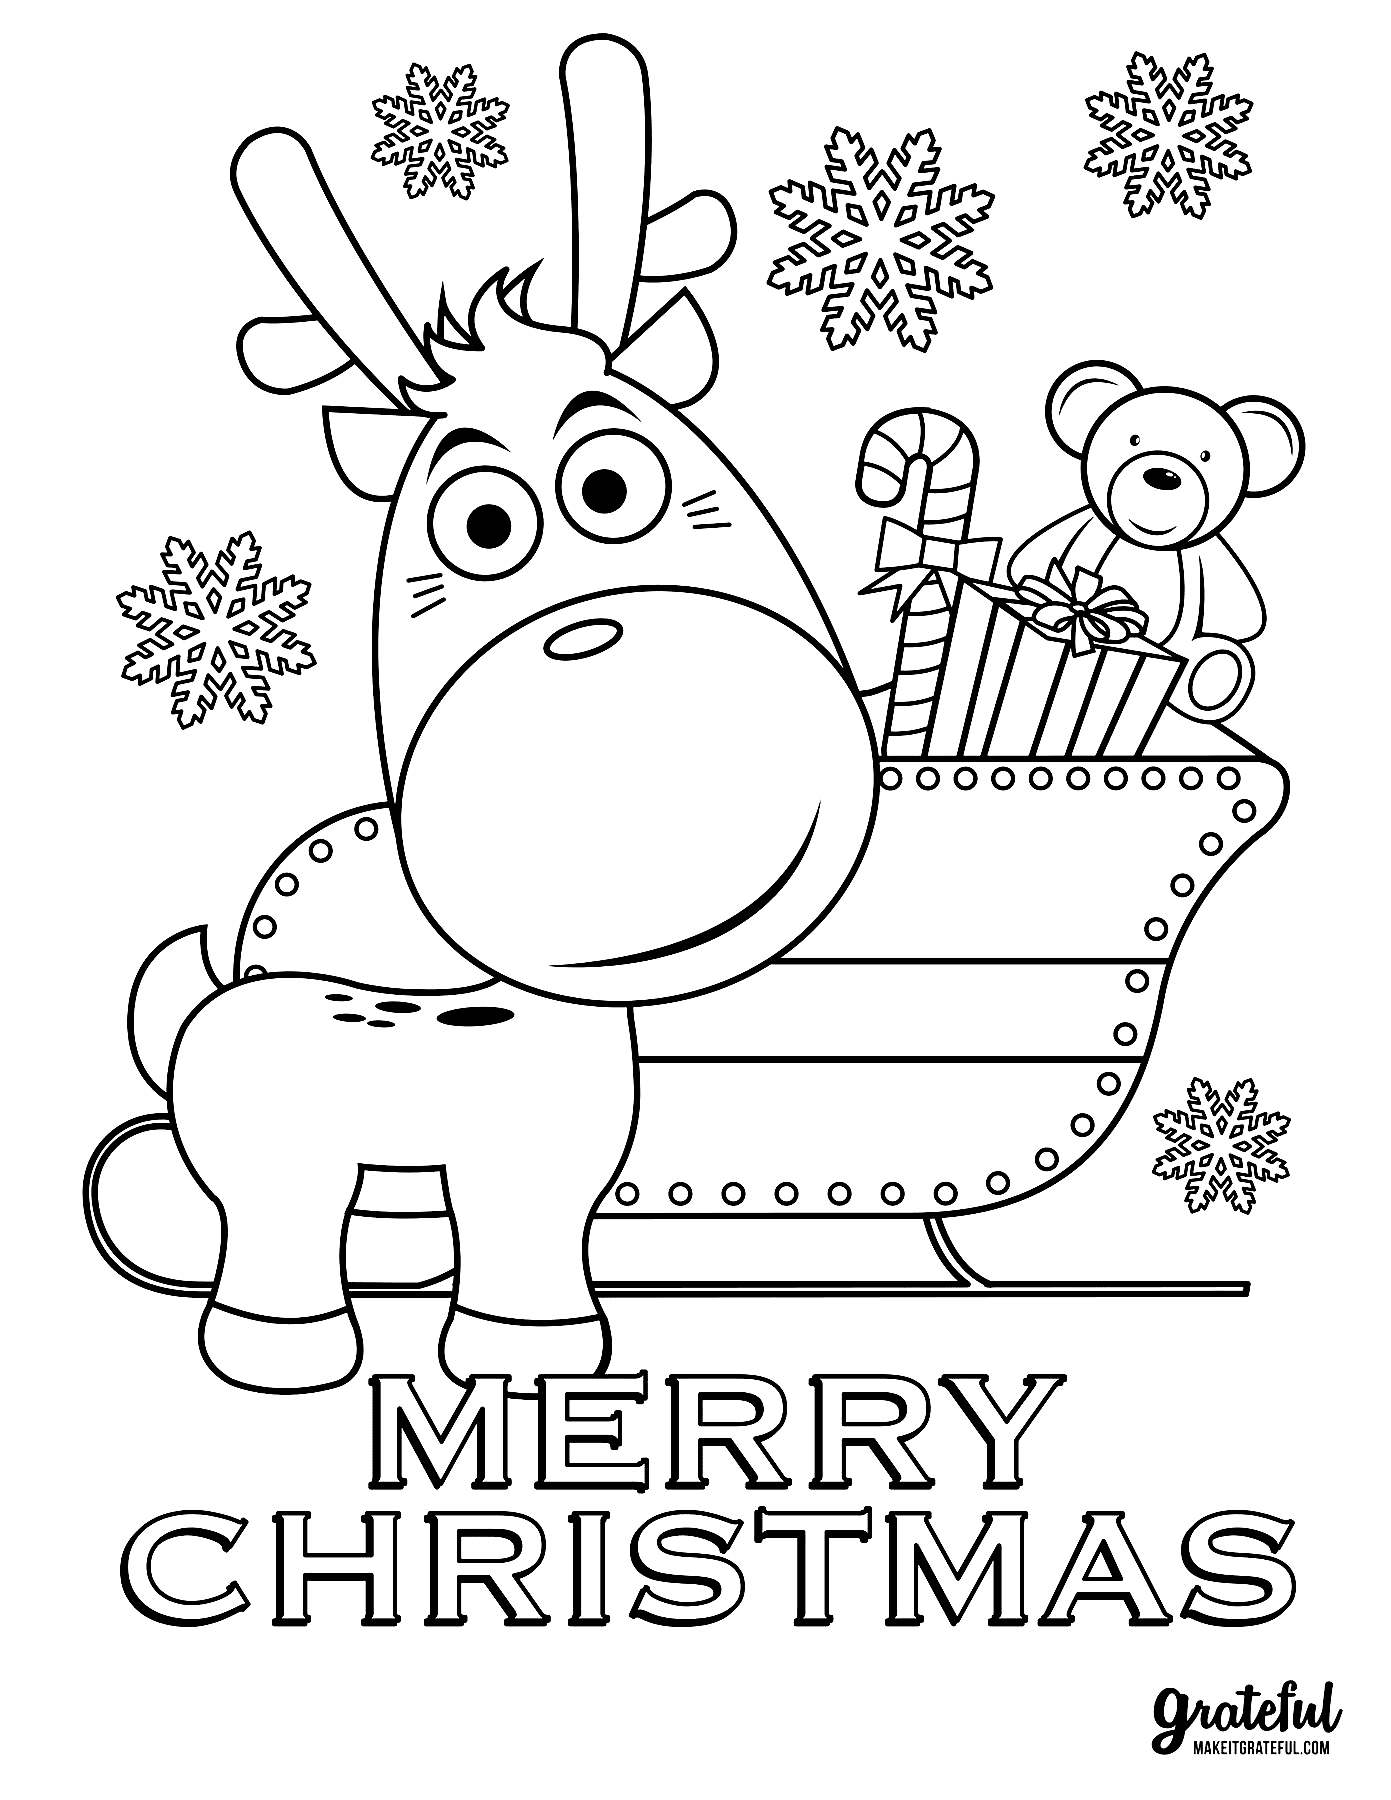 Free Printable Christmas Card Coloring Pages   Christmas Cards ...